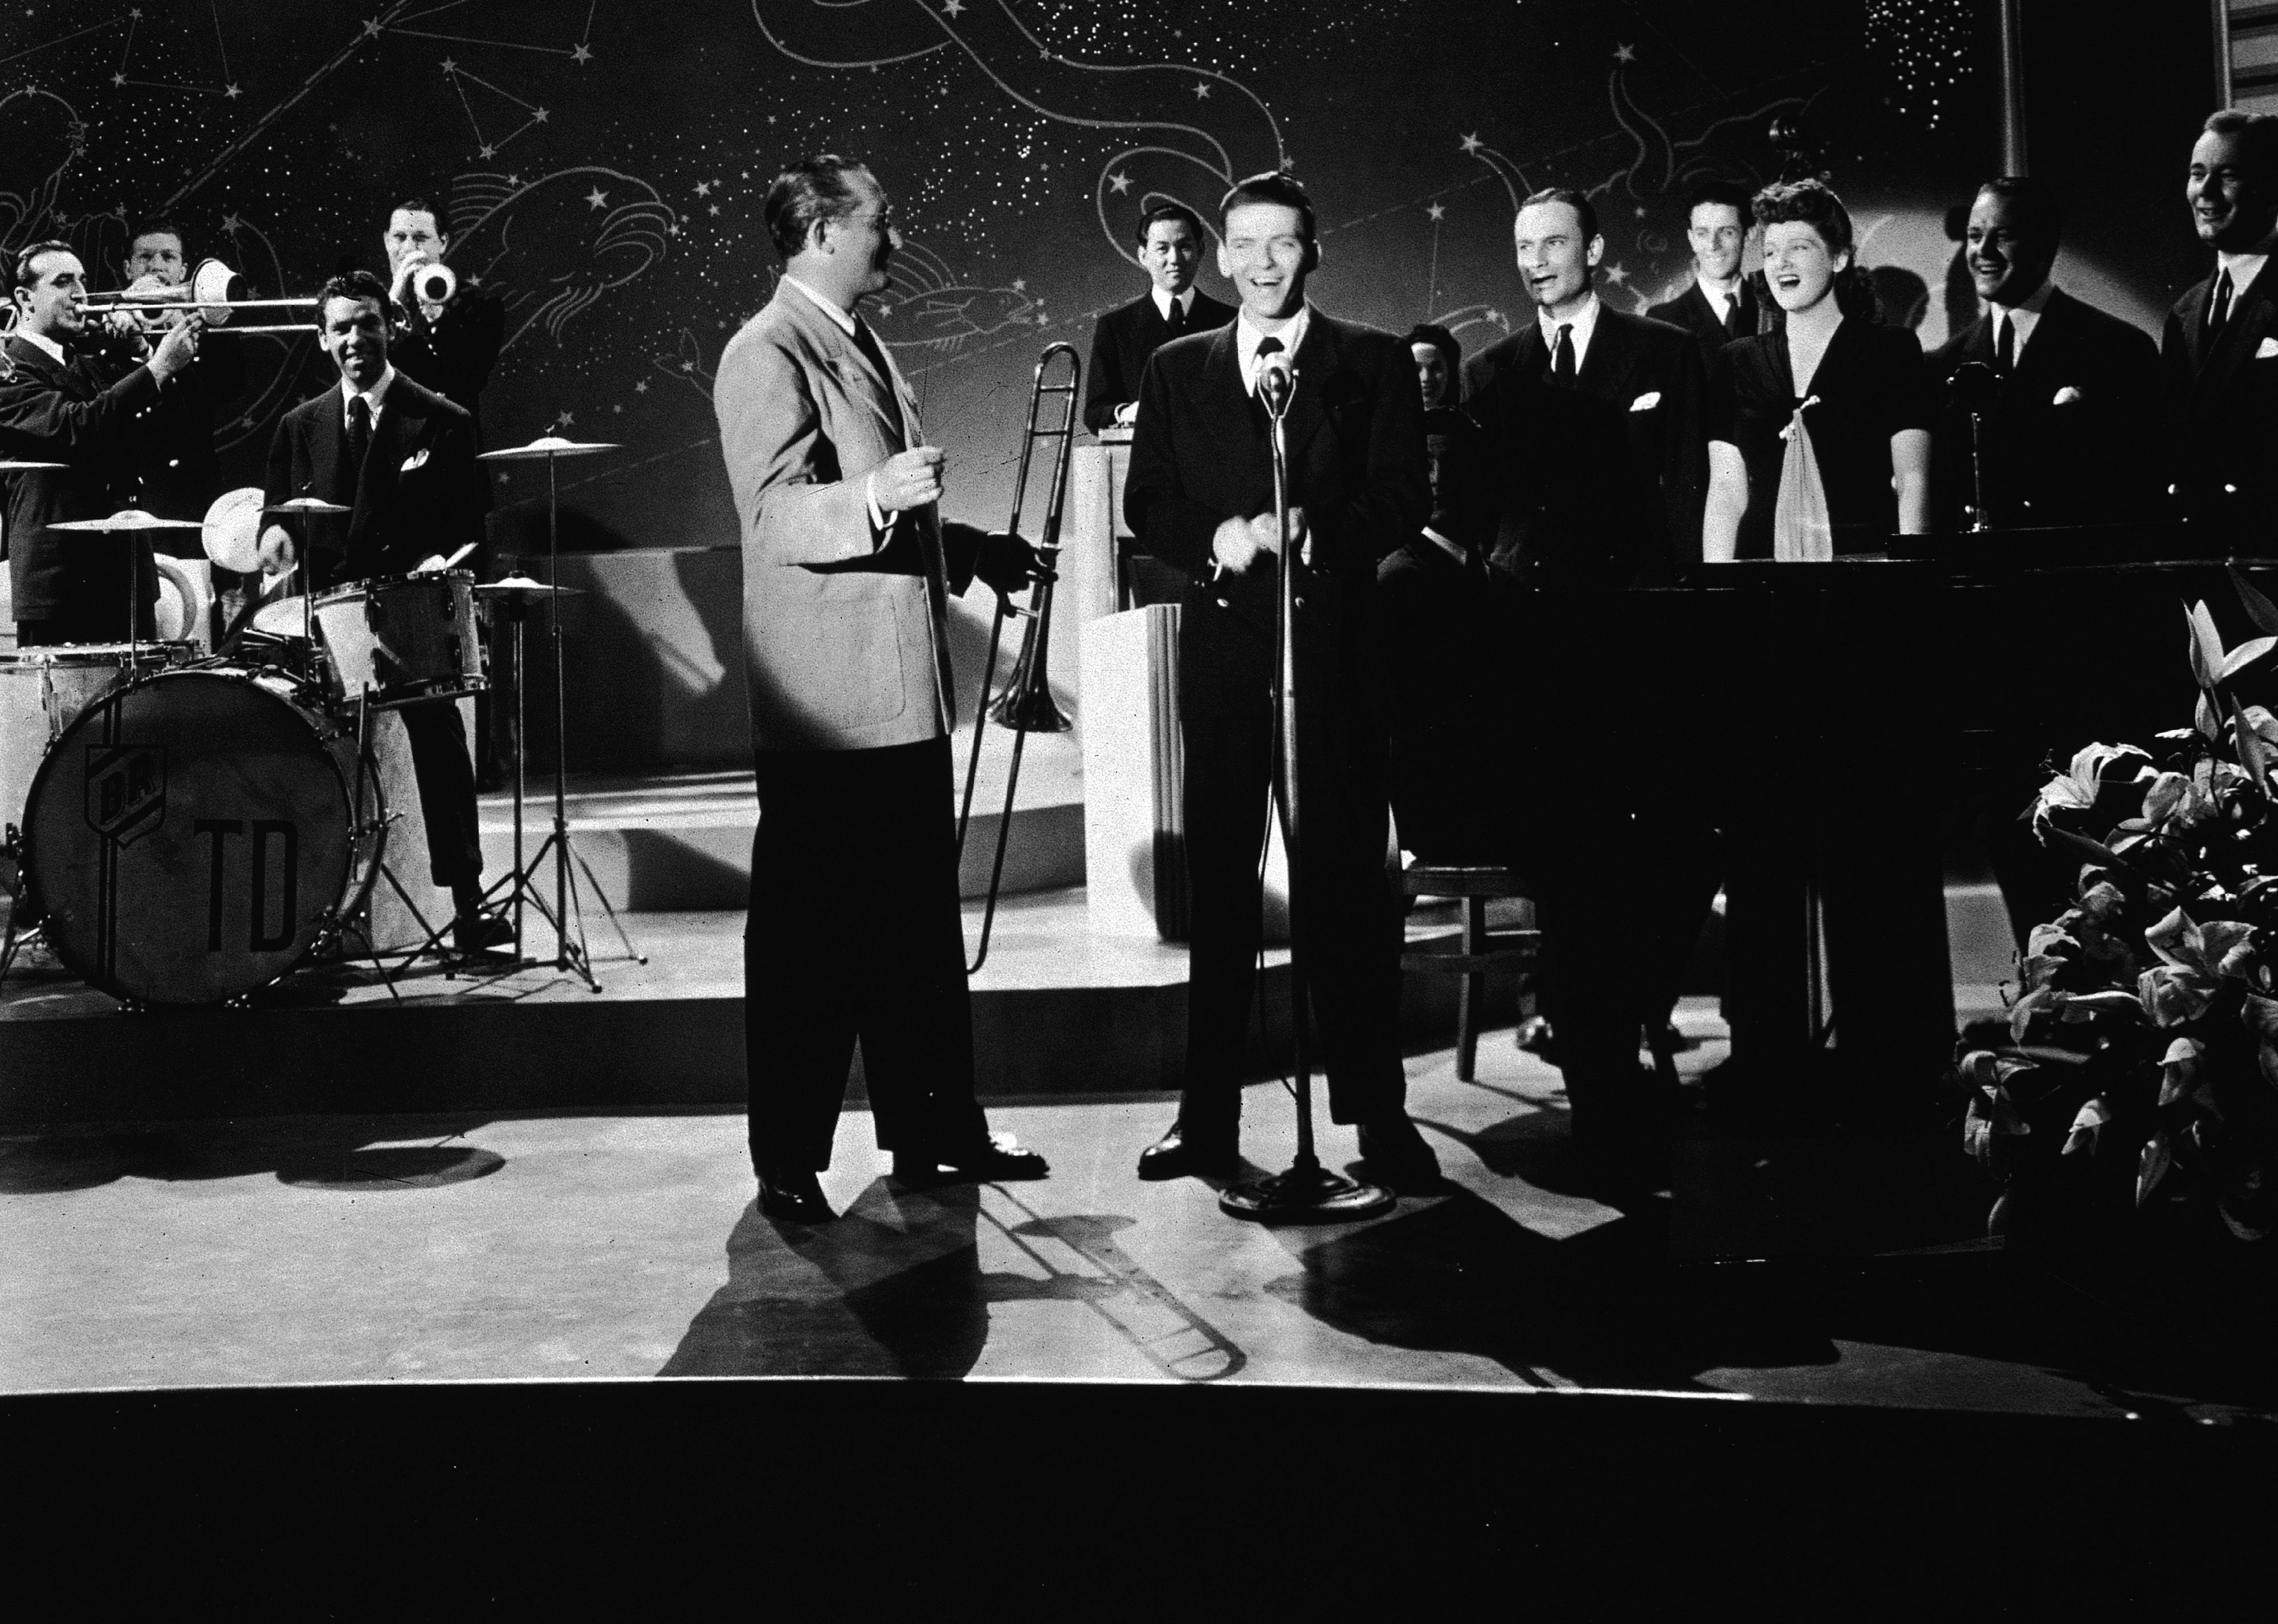 Frank Sinatra performs with the Tommy Dorsey Orchestra in a still from the film, 